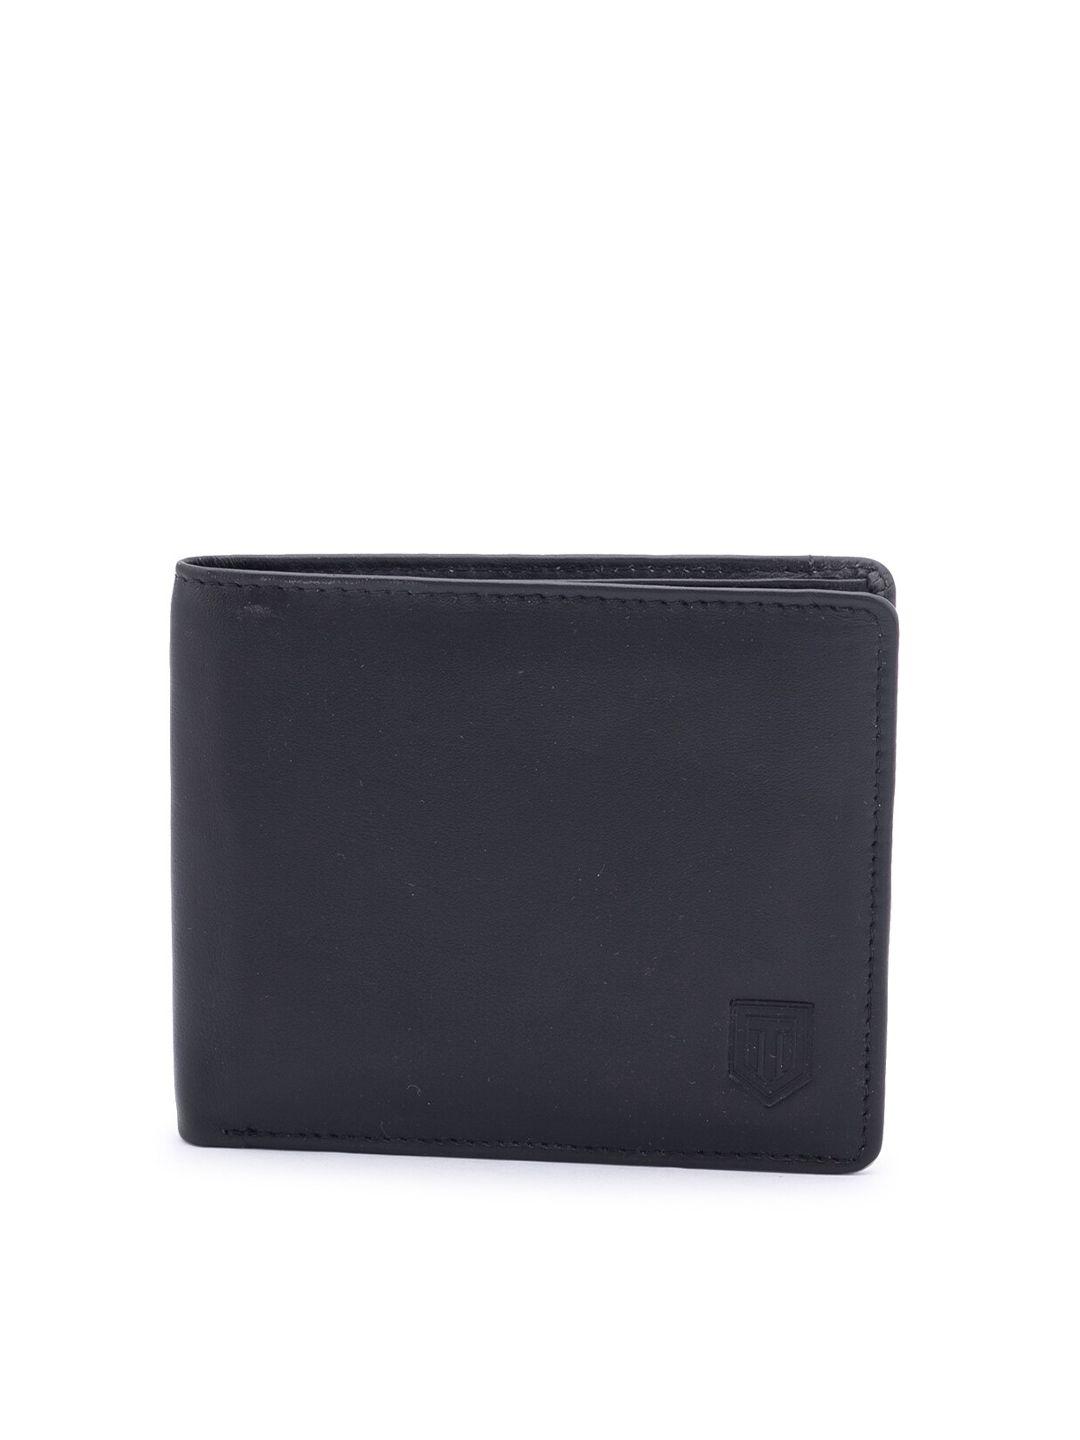 tom lang london men textured leather two fold wallet